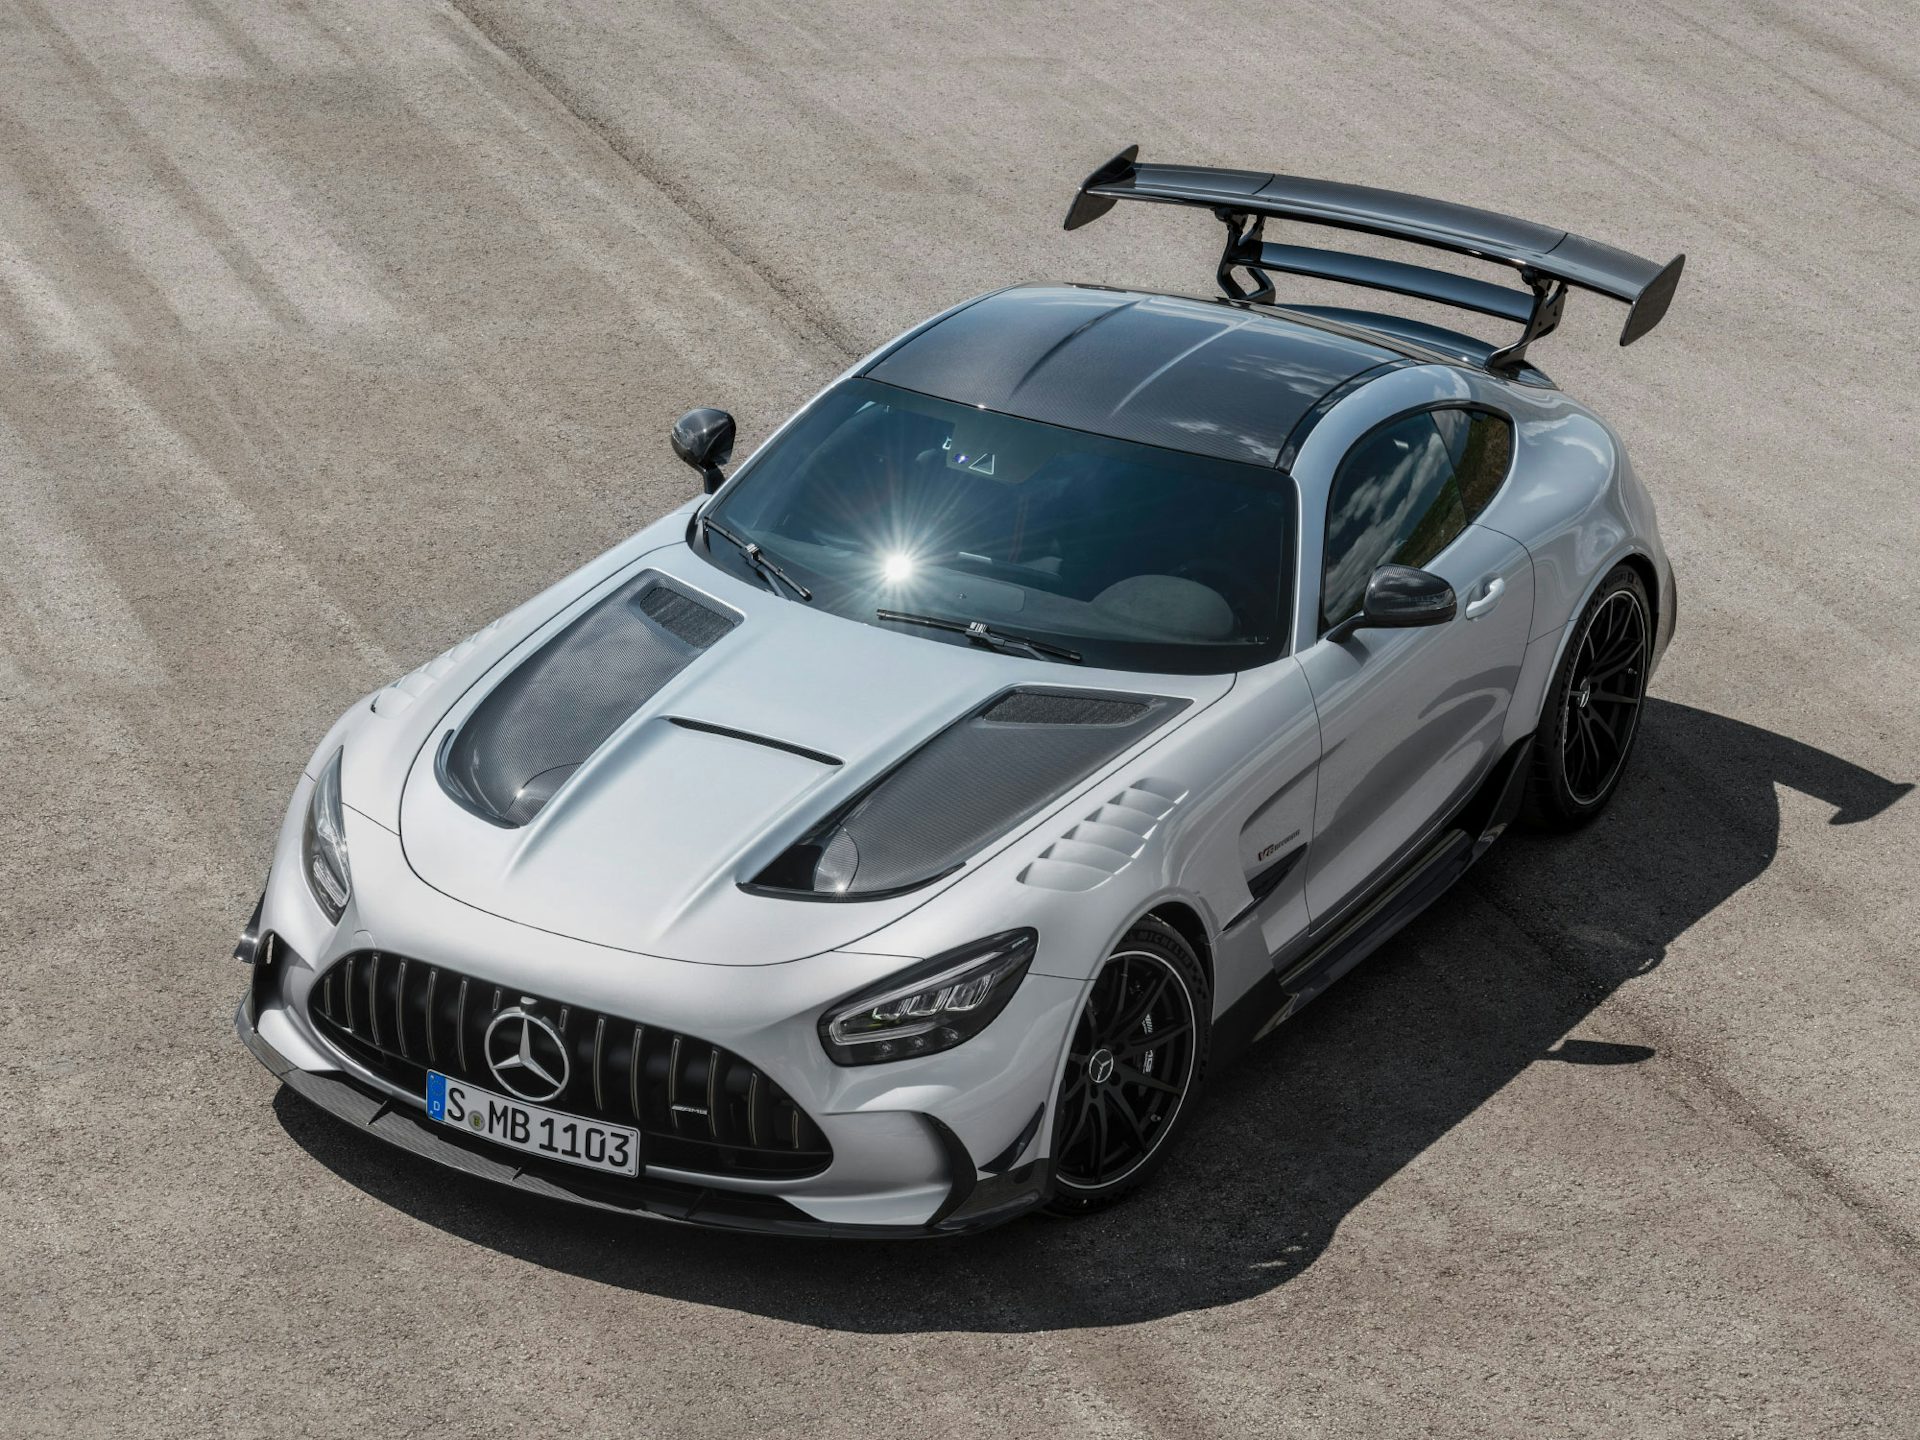 2021 Mercedes-AMG GT Black Series revealed: price, specs and release